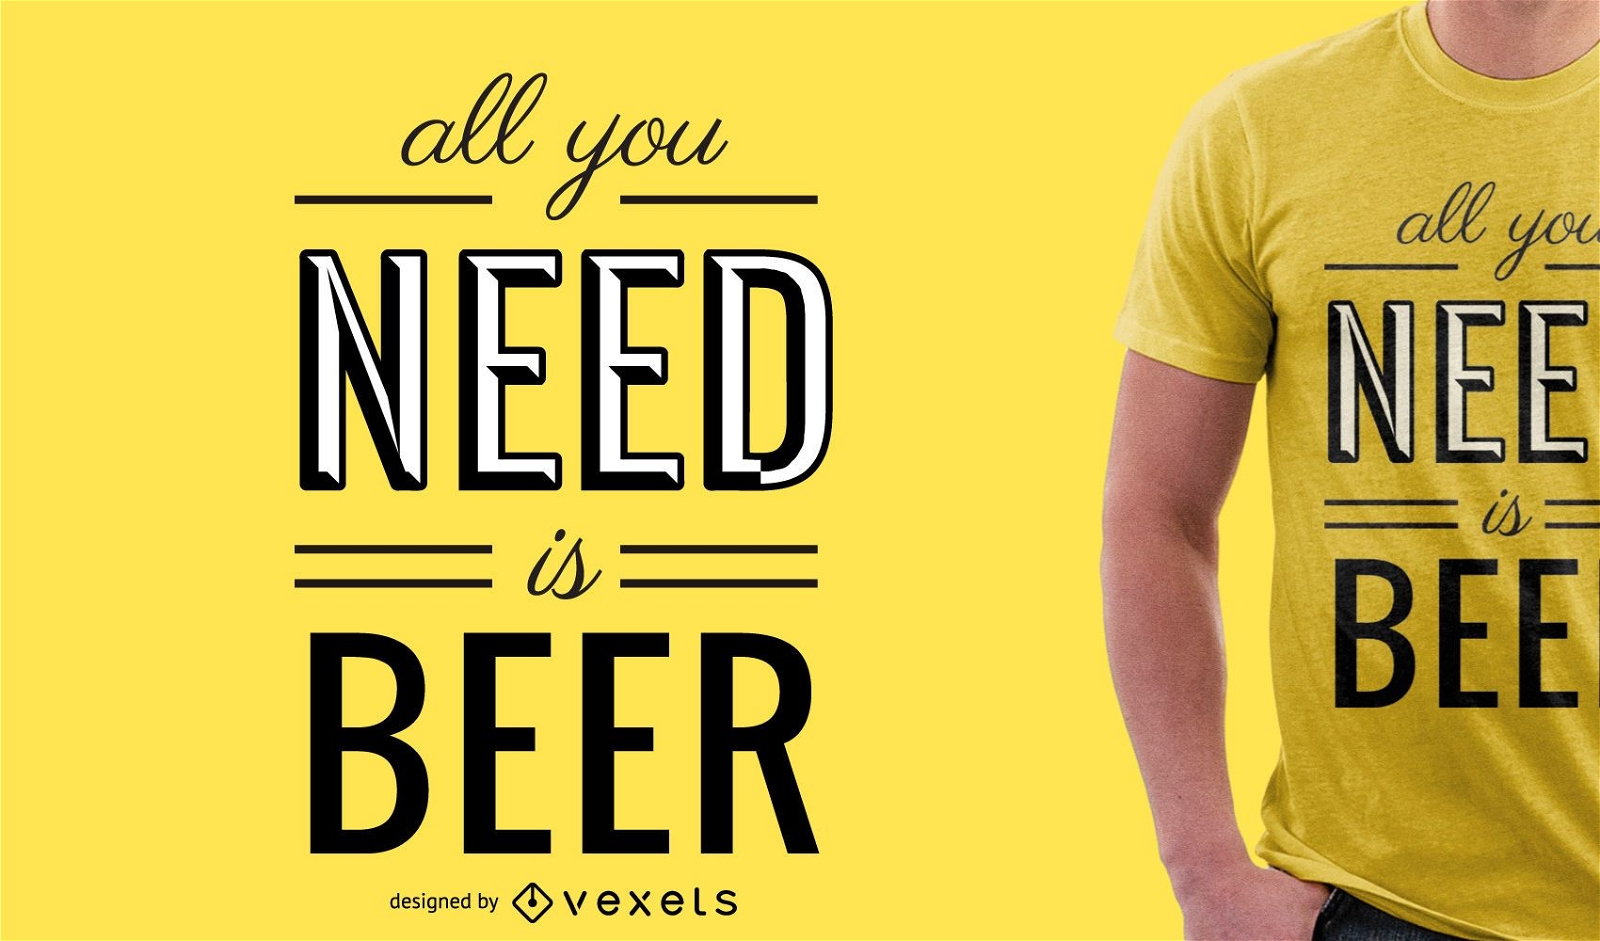 All you need is beer tshirt design